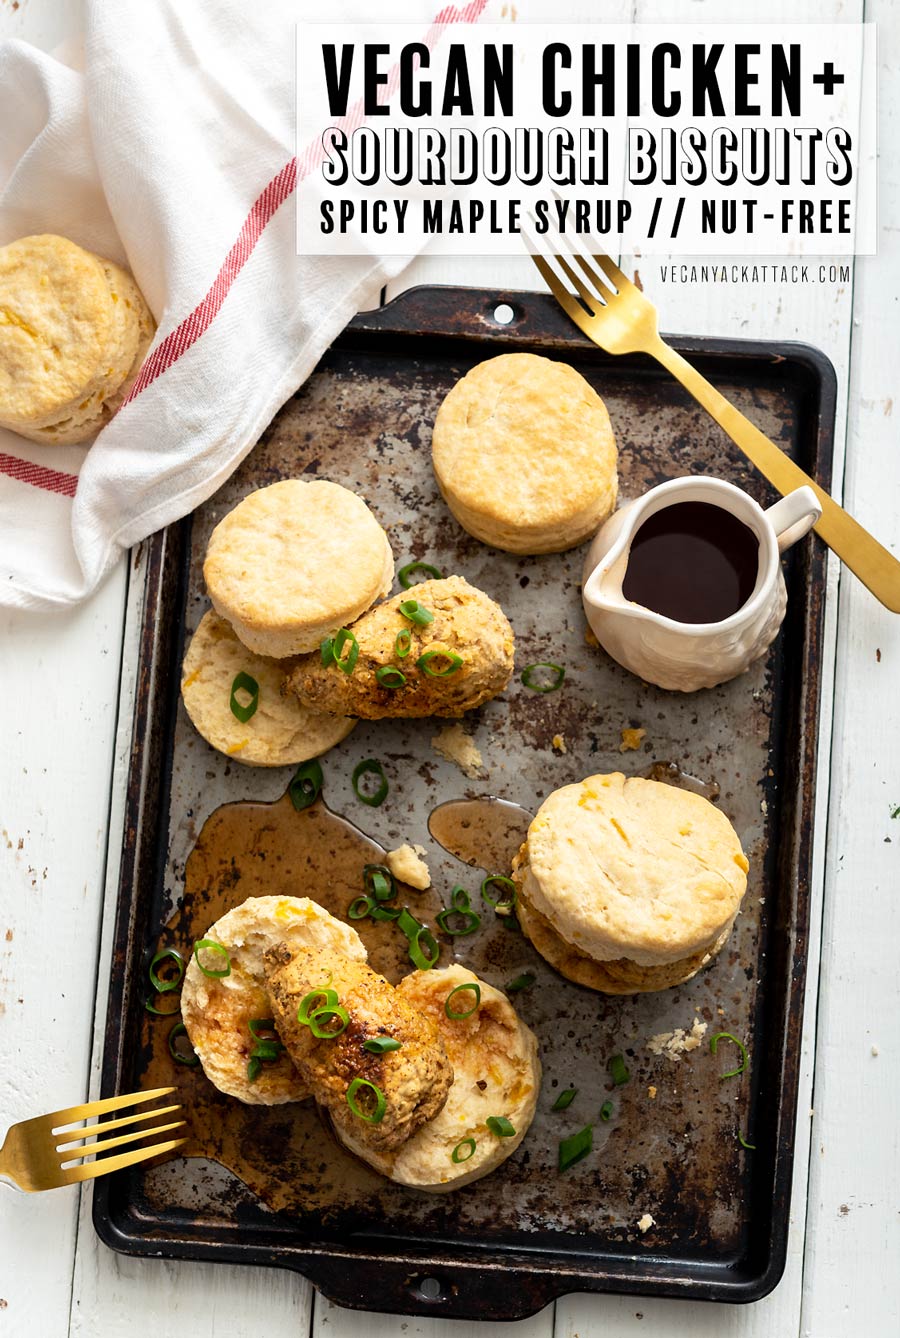 Hearty, flavorful, and perfect for weekend brunch, this vegan Chicken and sourdough biscuits recipe is straight up comfort food! And is non-vegan approved! #vegan #nutfree #brunch #dinner #sourdough #biscuits